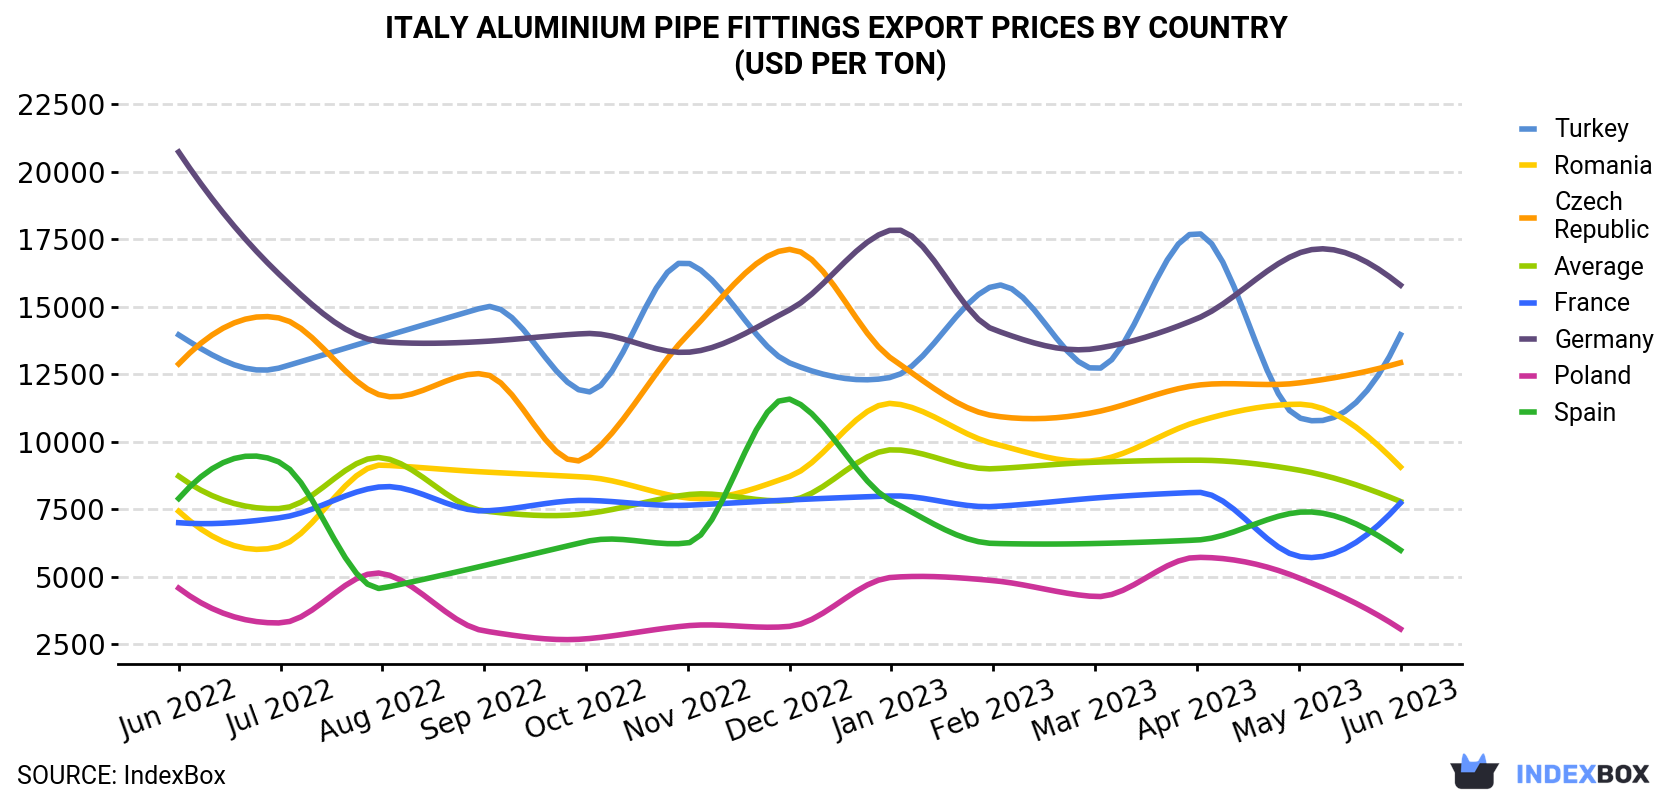 Italy Aluminium Pipe Fittings Export Prices By Country (USD Per Ton)